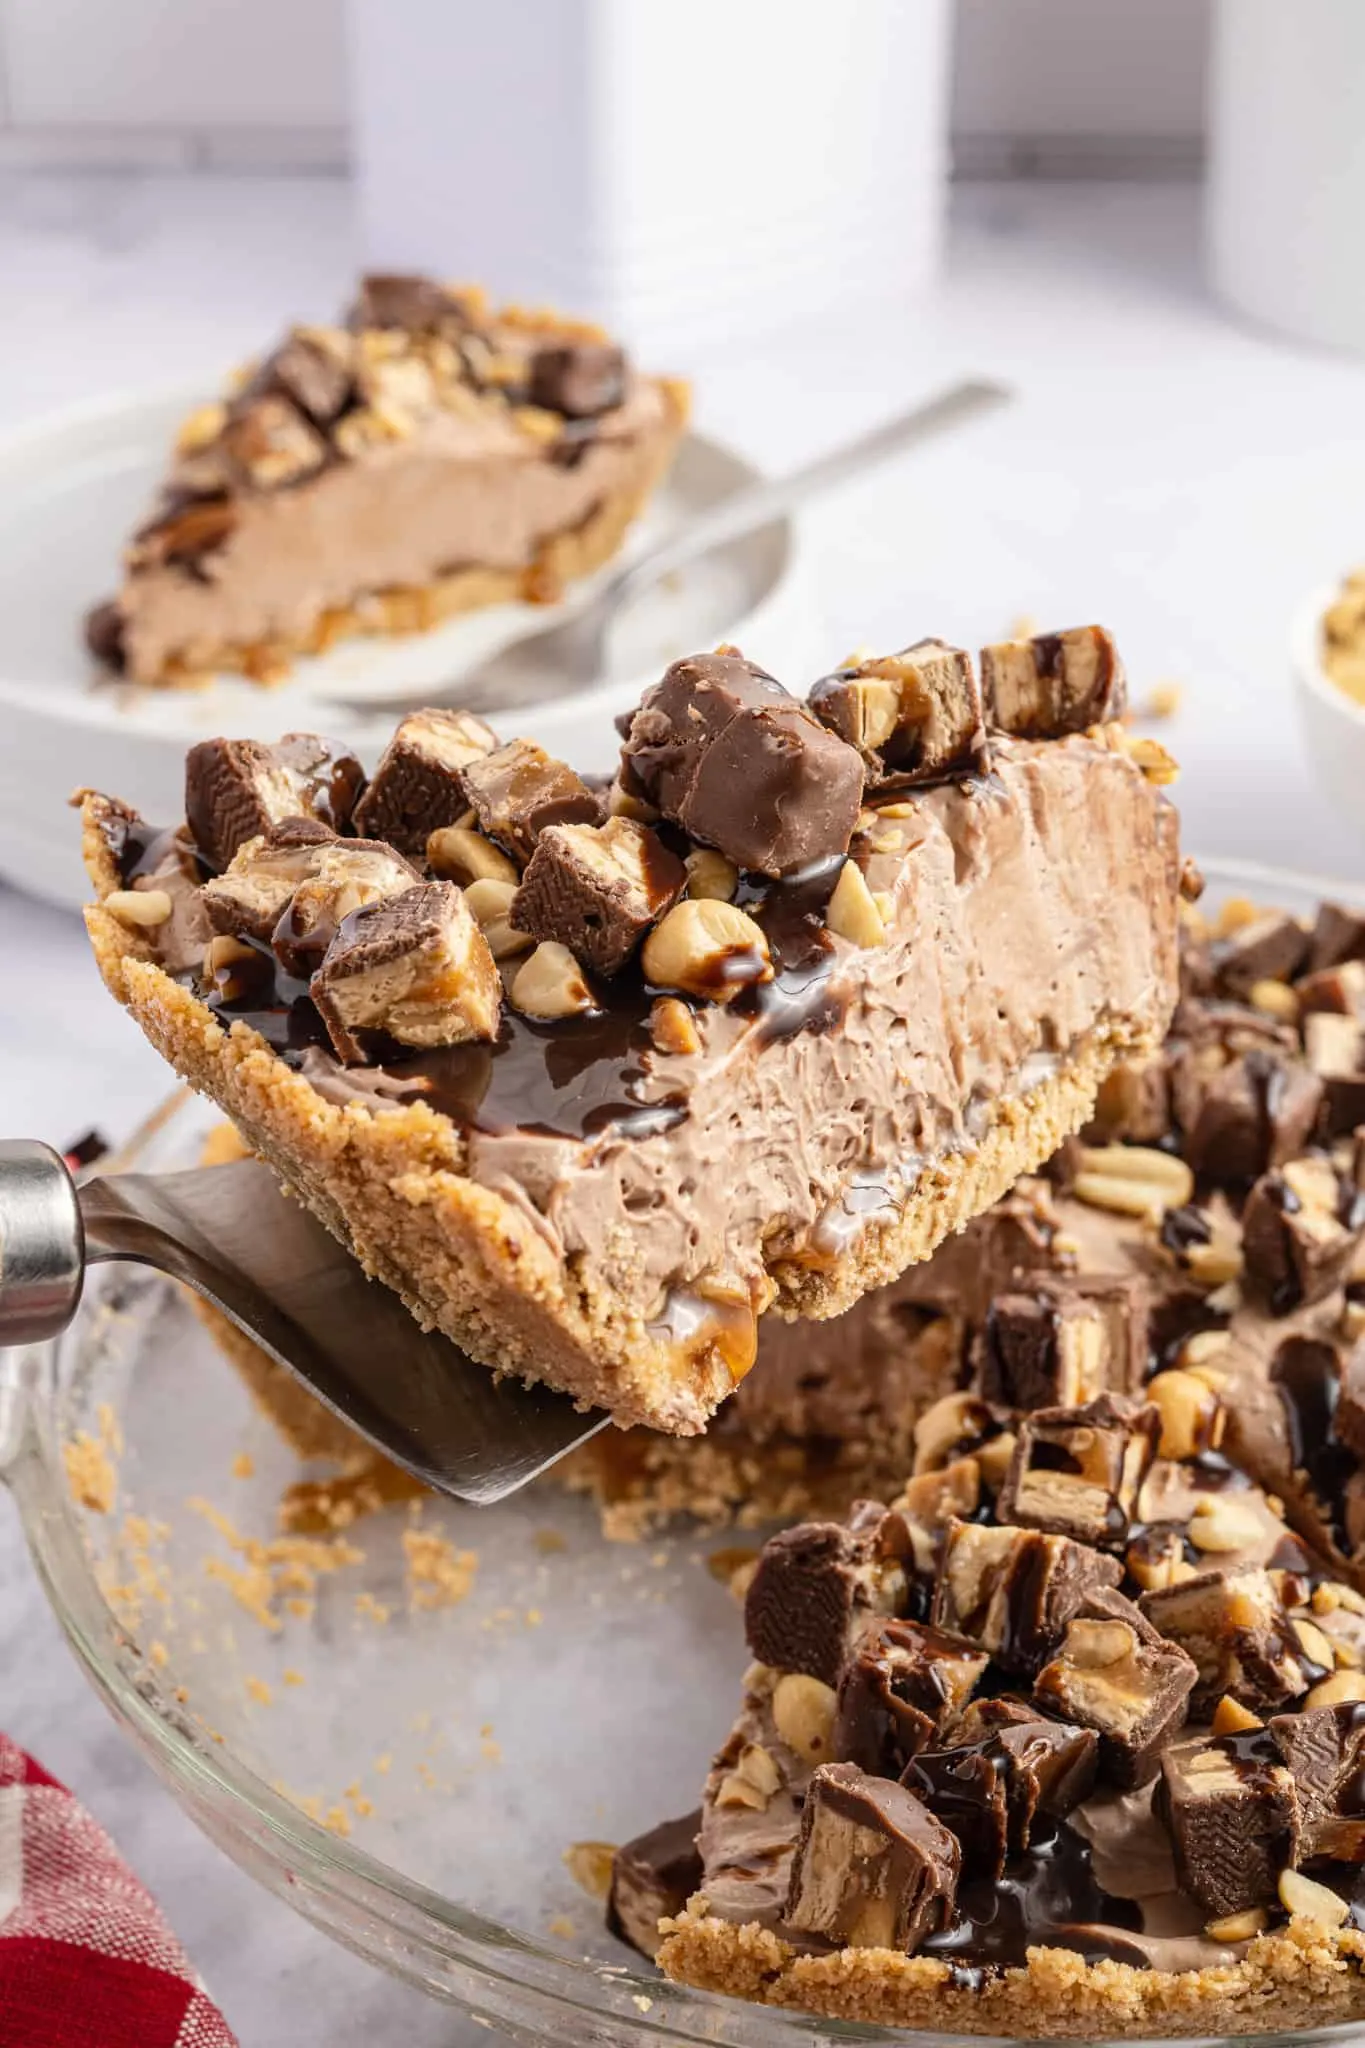 Snickers Pie is a delicious no bake dessert recipe with a graham cracker crust and a creamy filling made with cream cheese, cocoa powder, caramel sauce and Cool Whip all loaded with salted peanuts and chopped Snickers candy bars.